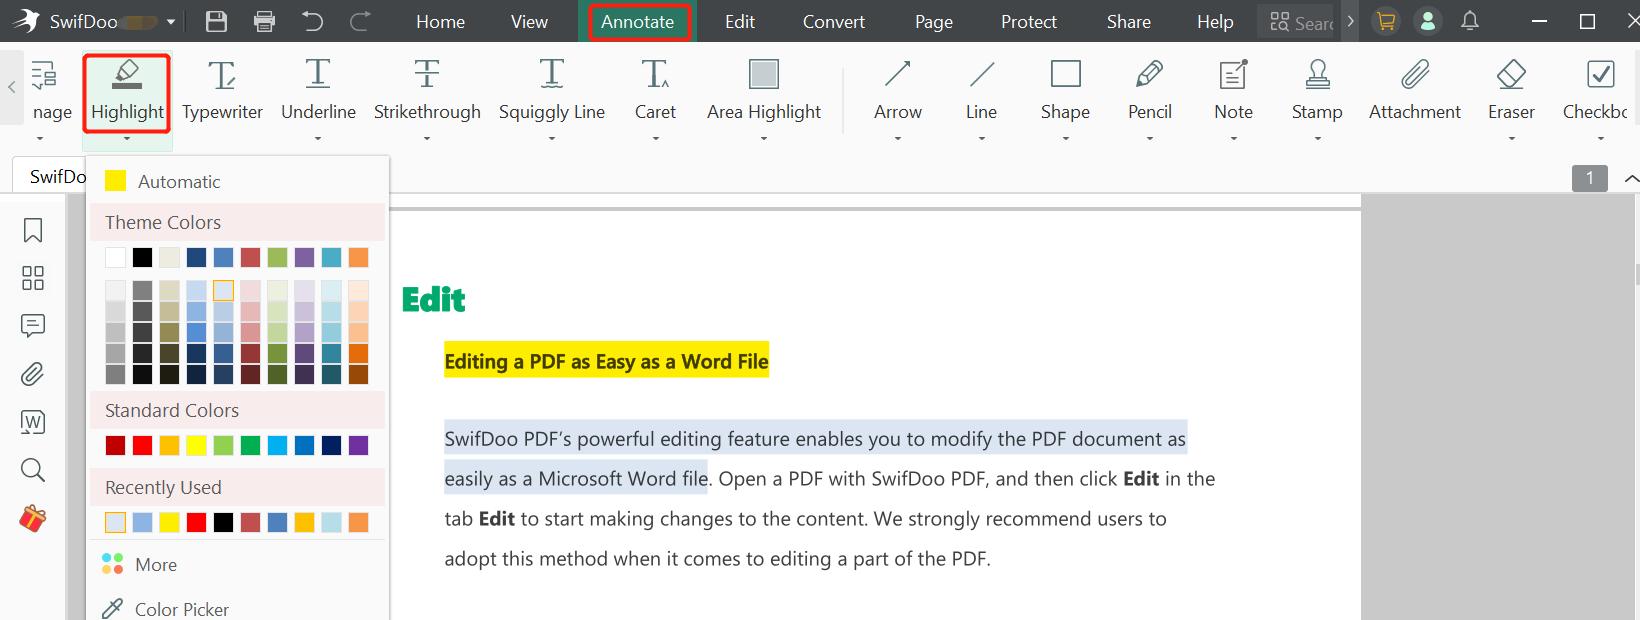 How to annotate a PDF with SwifDoo PDF step 2